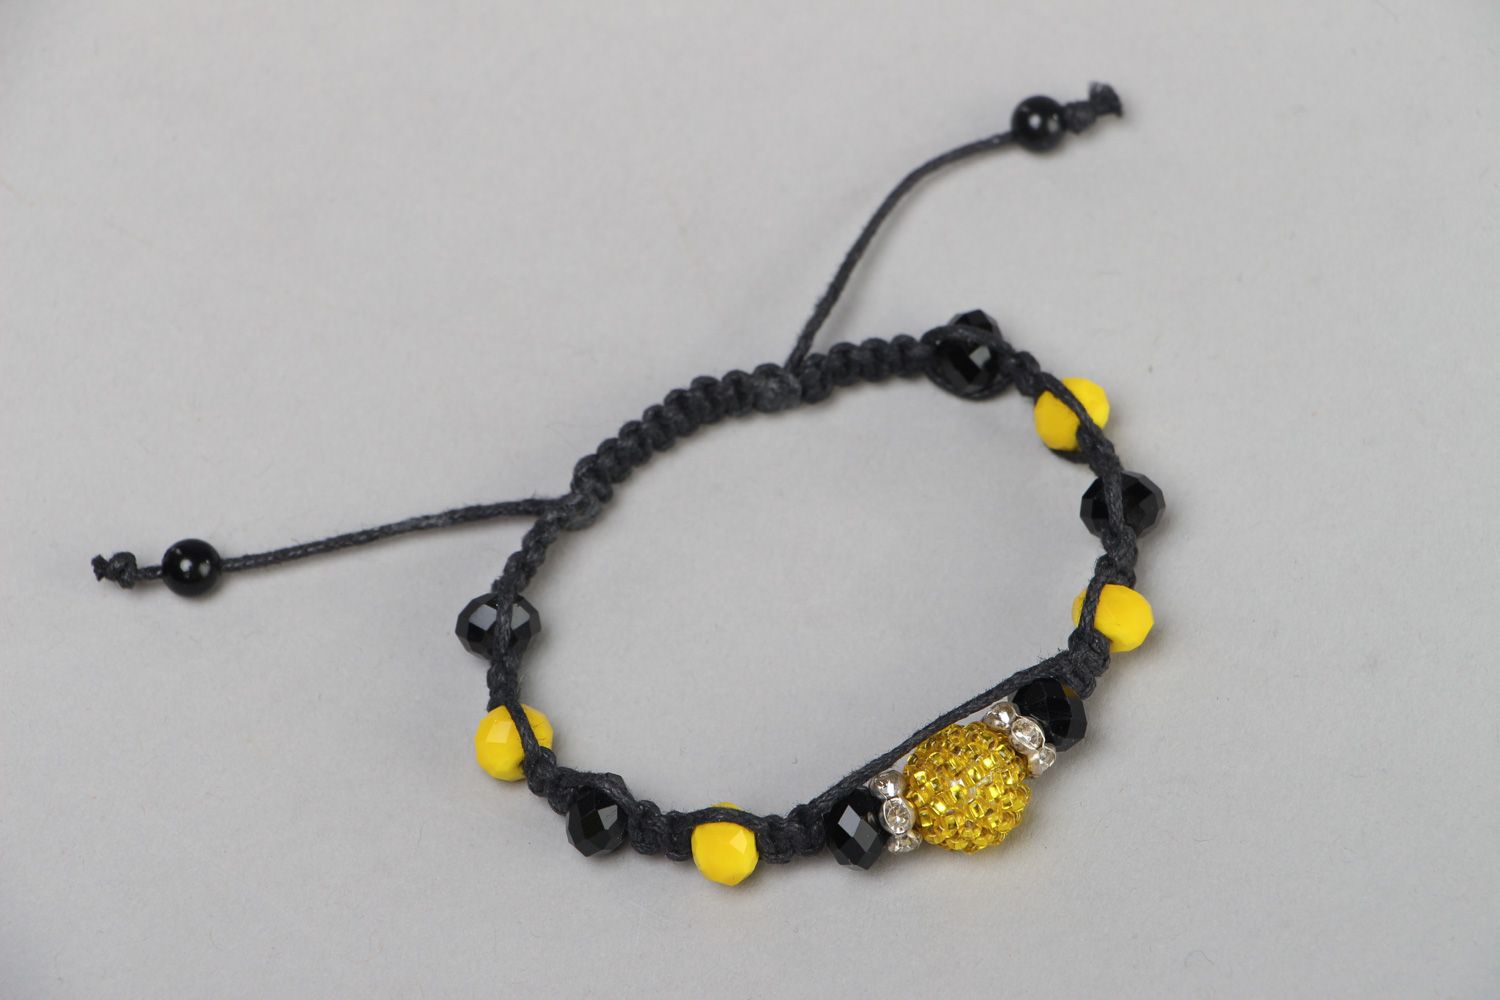 Handmade friendship bracelet woven of black cord and yellow beads for women photo 2